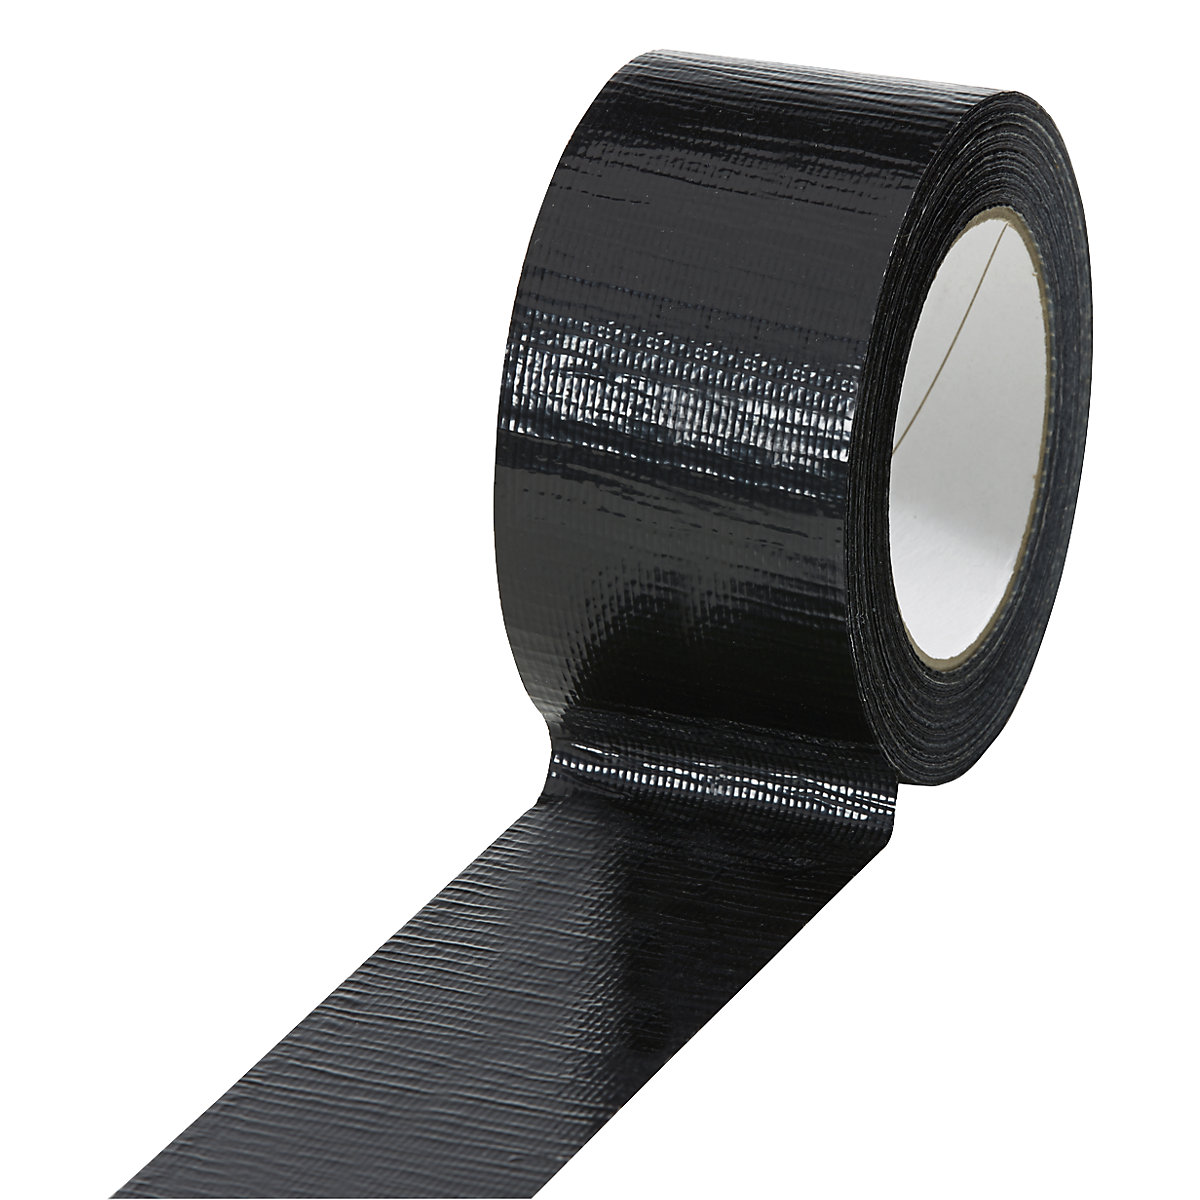 Fabric tape, in different colours, pack of 18 rolls, black, tape width 50 mm-18